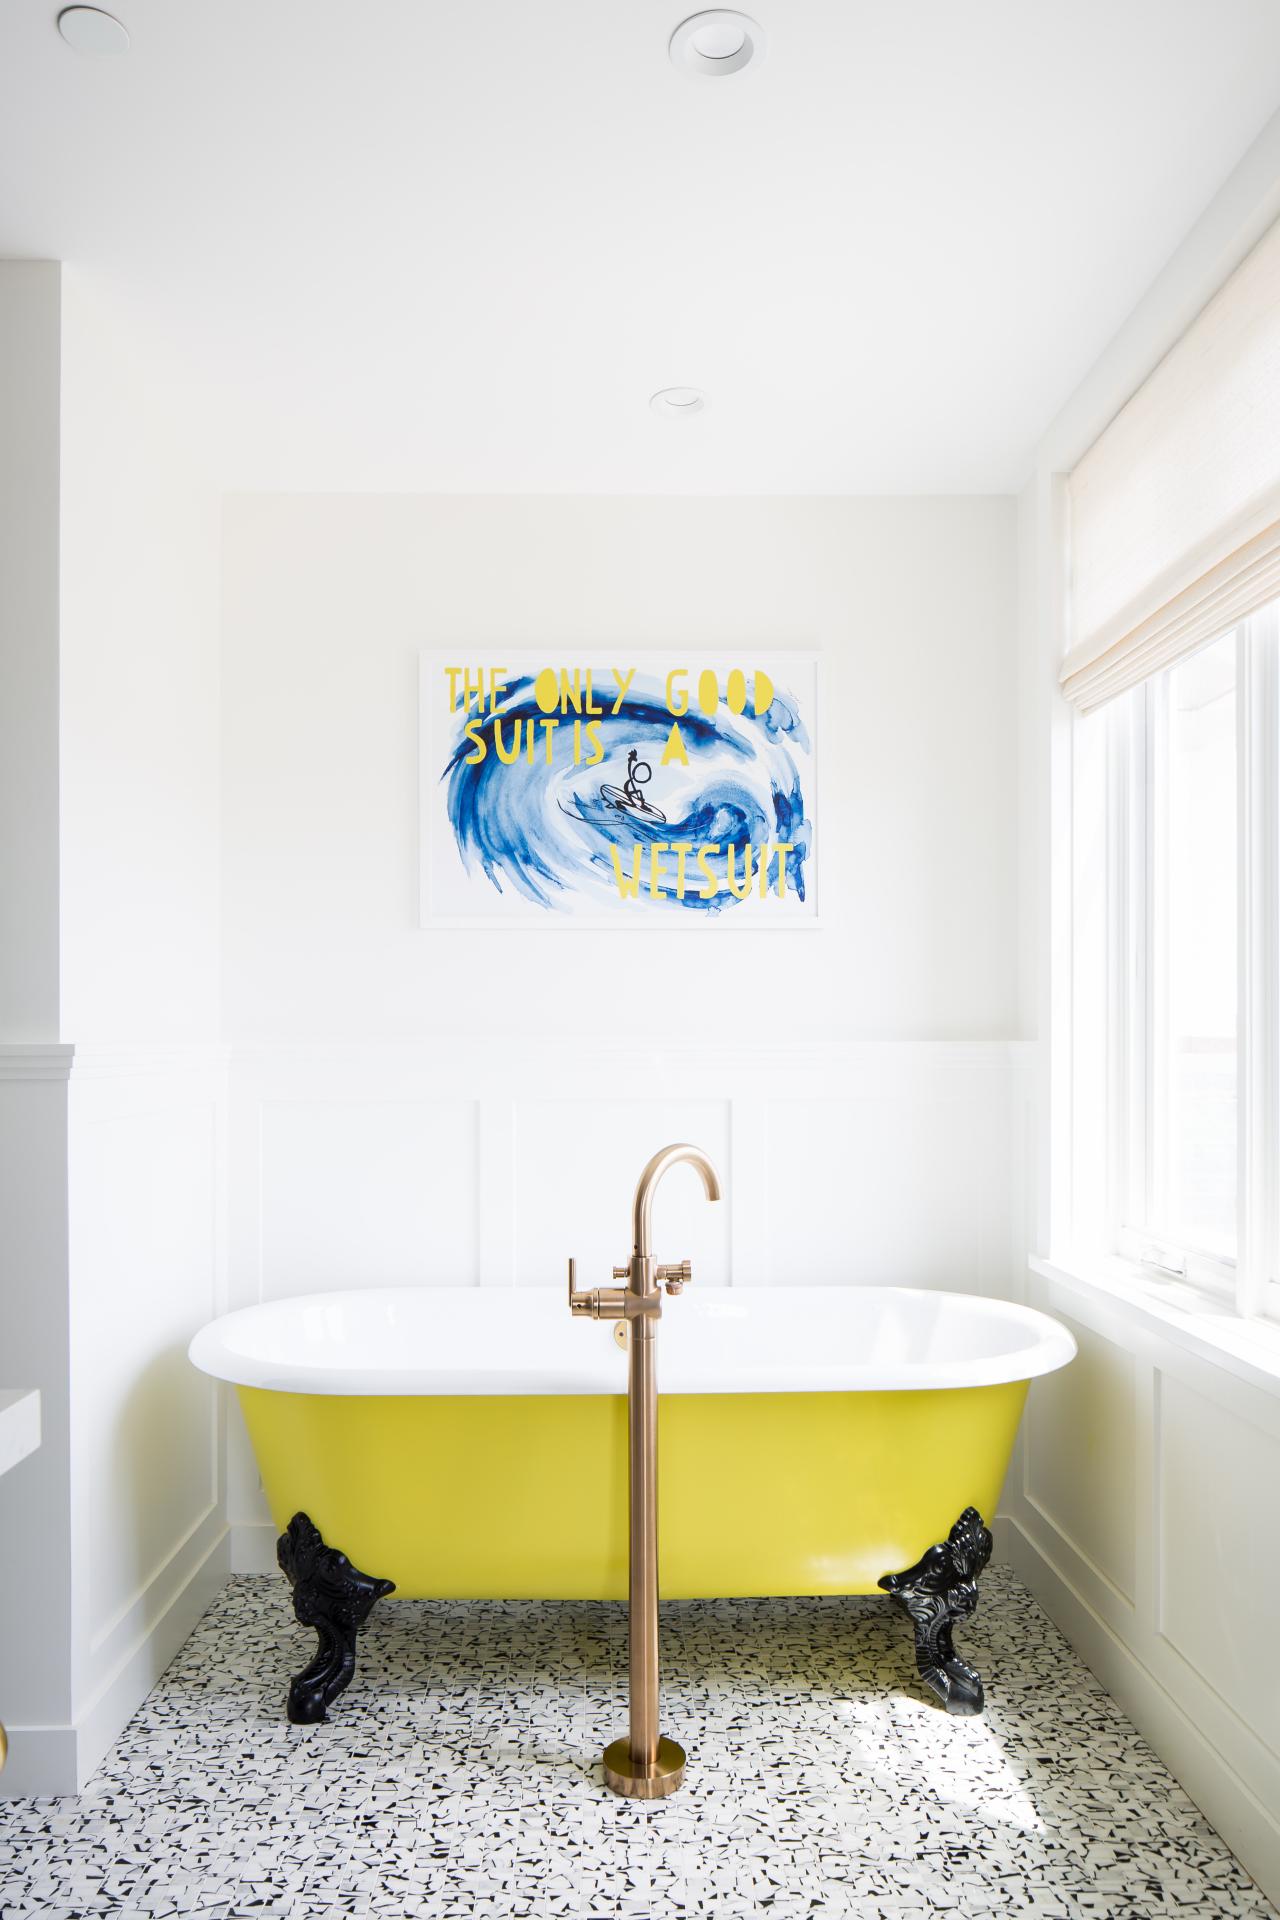 Clawfoot Tub Designs: Pictures, Ideas & Tips From HGTV